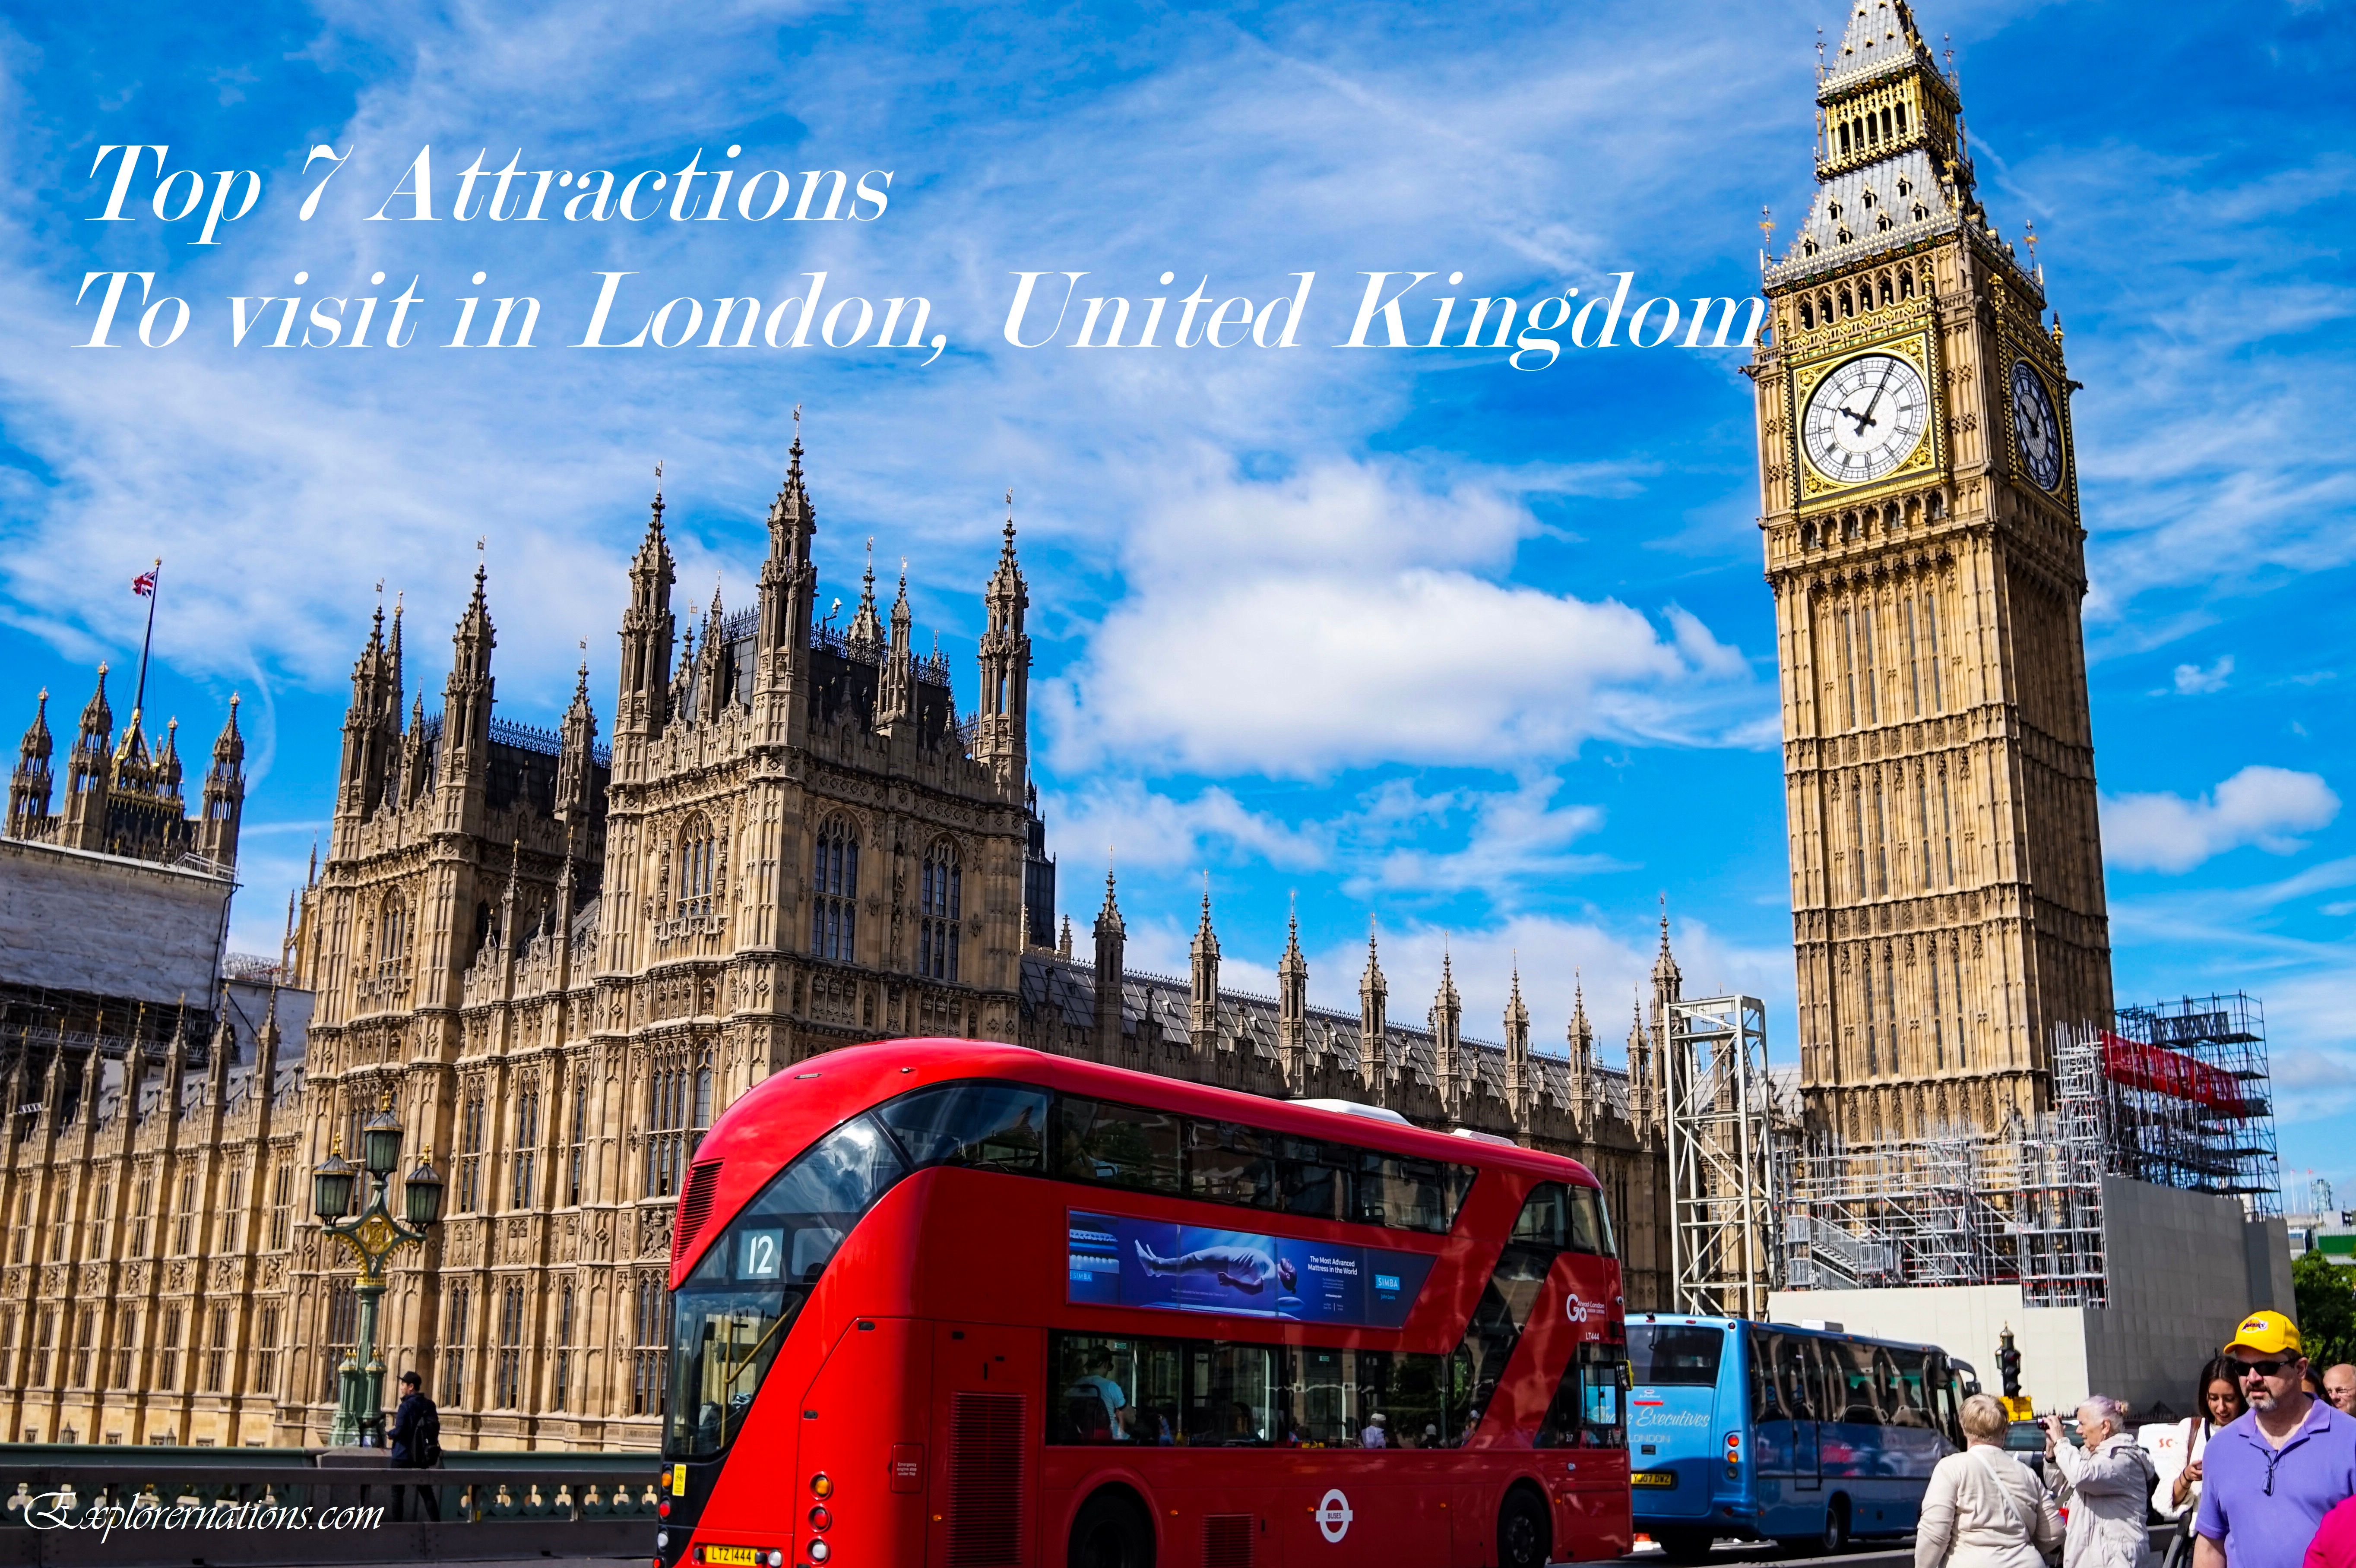 Travel Blog 26 Top 7 Attractions You Need To Visit Now In London